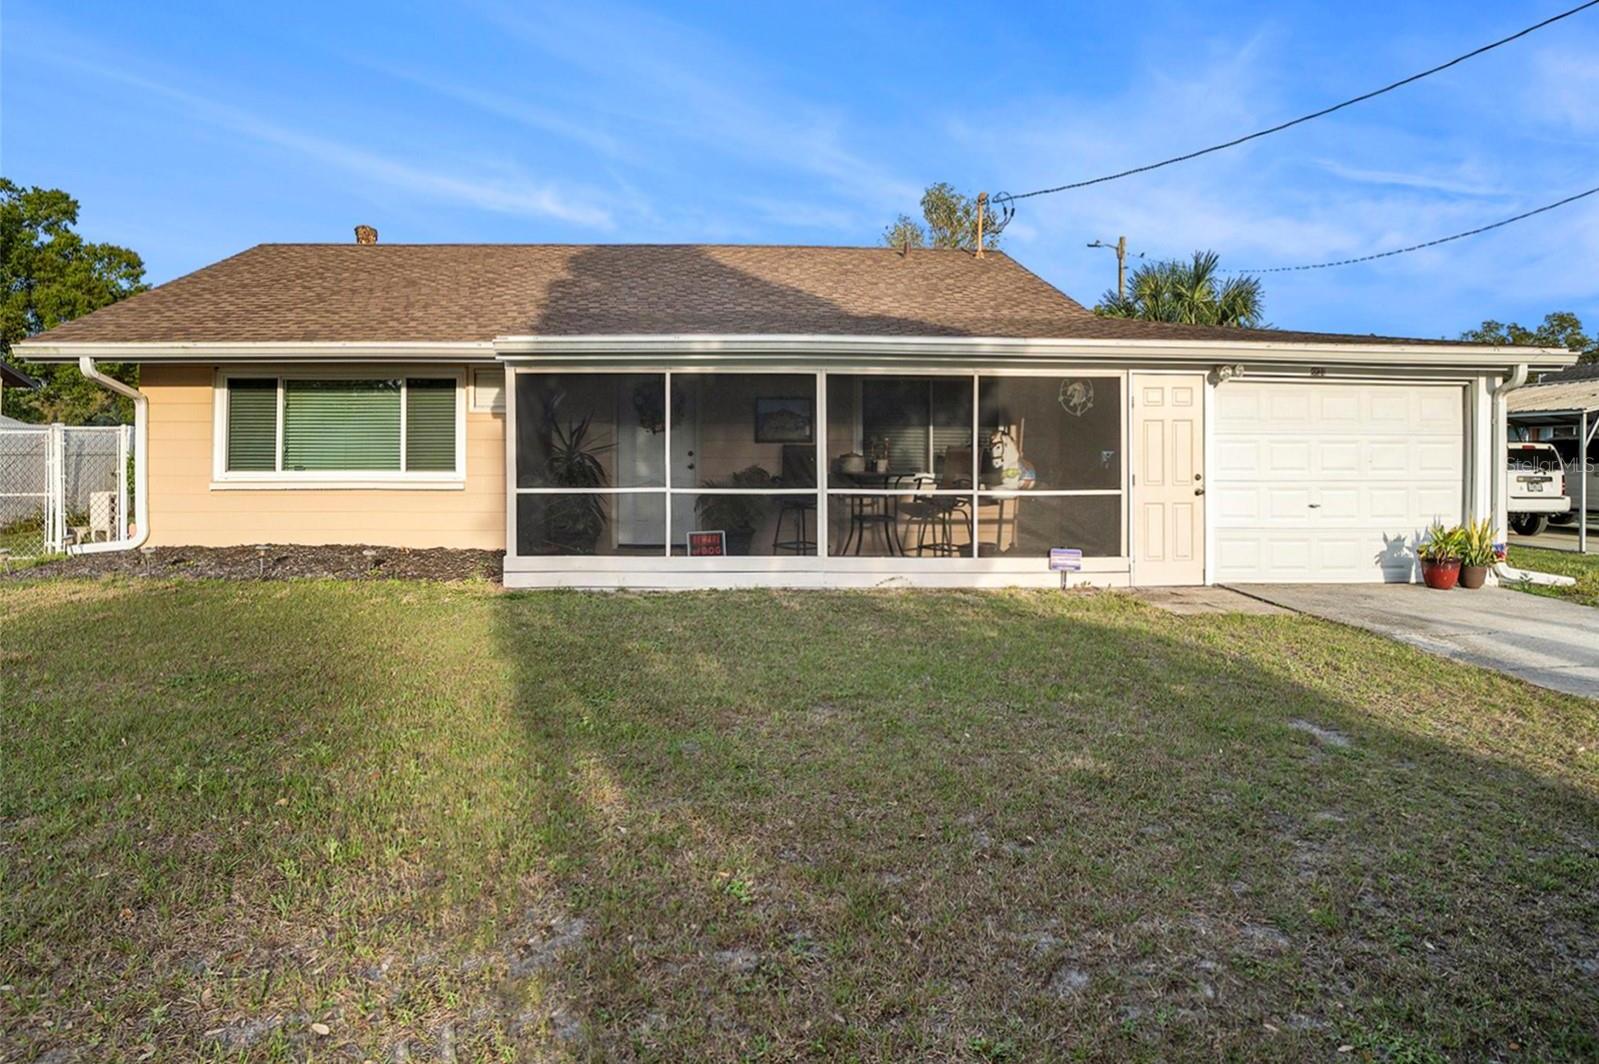 Photo one of 8824 Dyer Rd Riverview FL 33578 | MLS T3509353